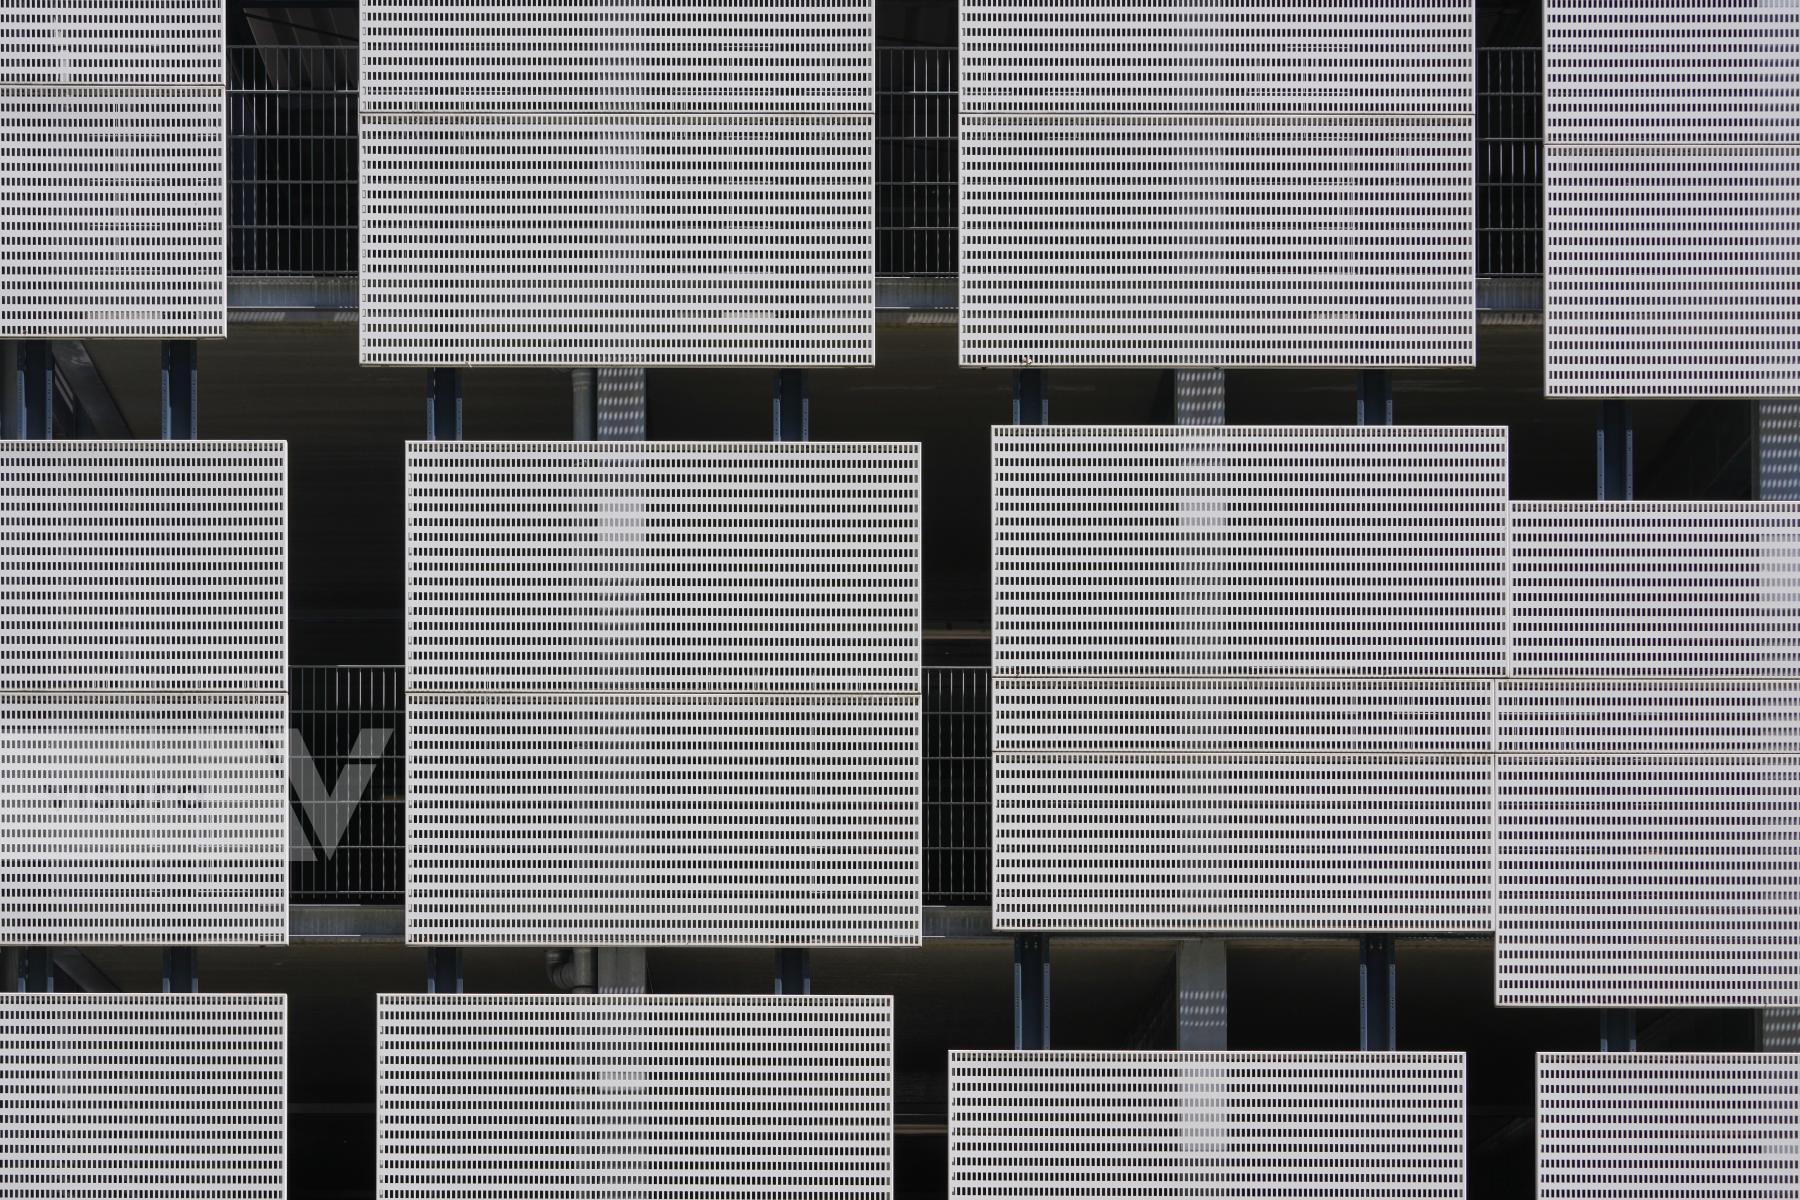 Purchase Metal-paneled Facade: Artistic Patterns by Michael Nguyen